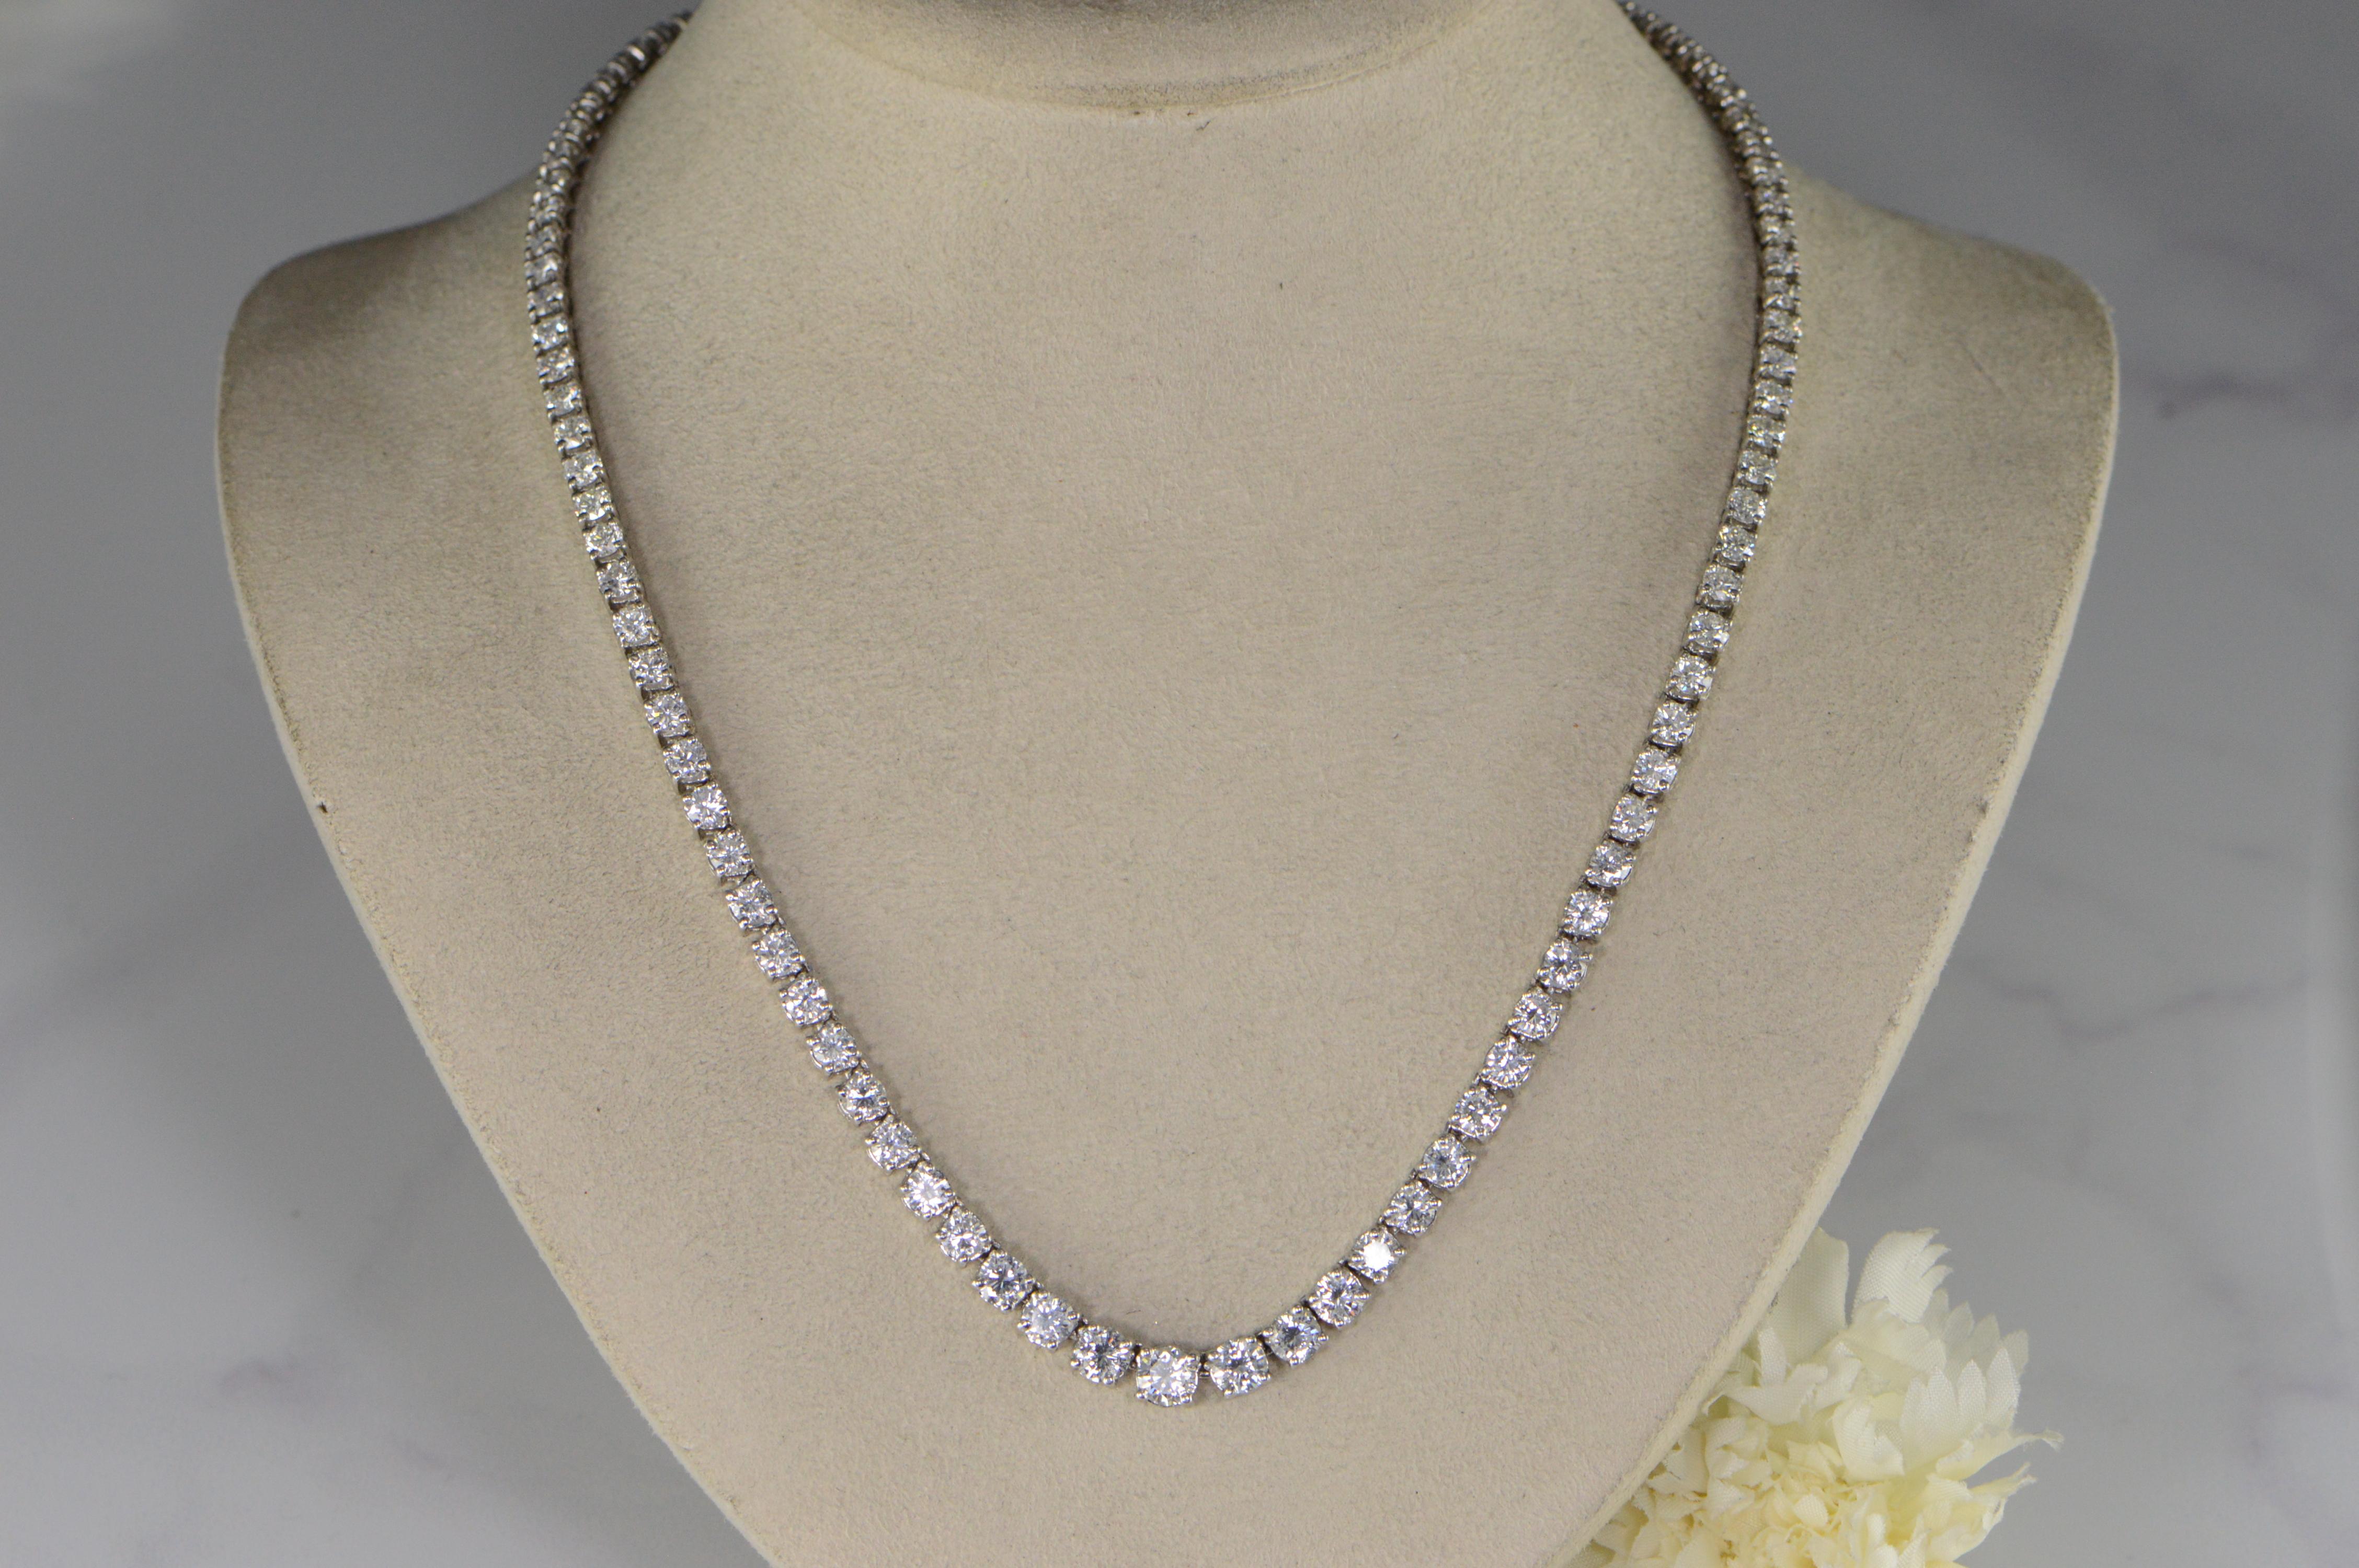 15 Carat Diamonds Platinum Necklace In Excellent Condition For Sale In Frederick, MD